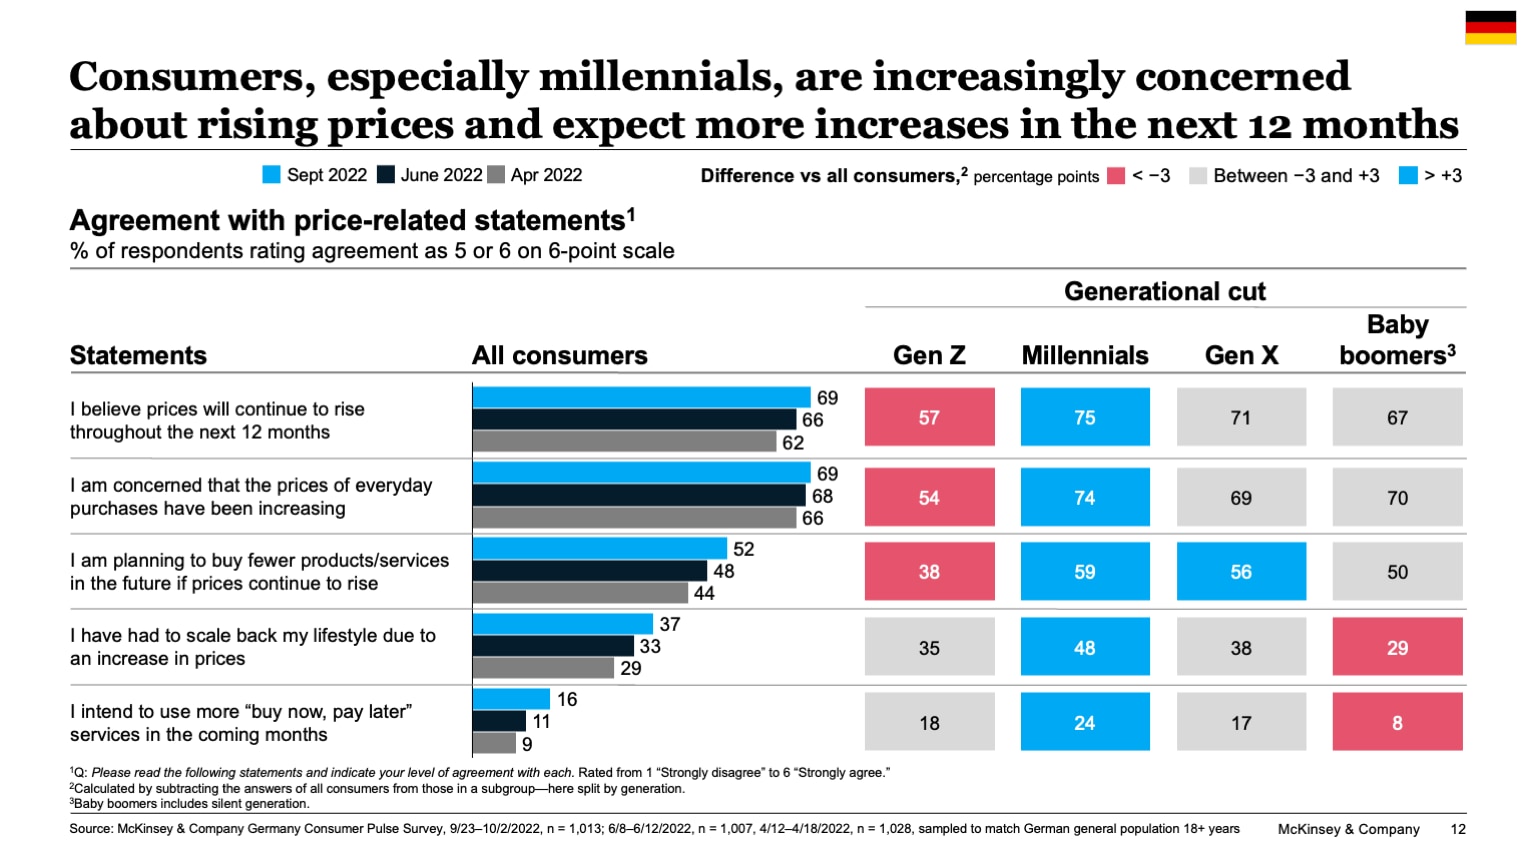 Consumers, especially millennials, are increasingly concerned about rising prices and expect more increases in the next 12 months